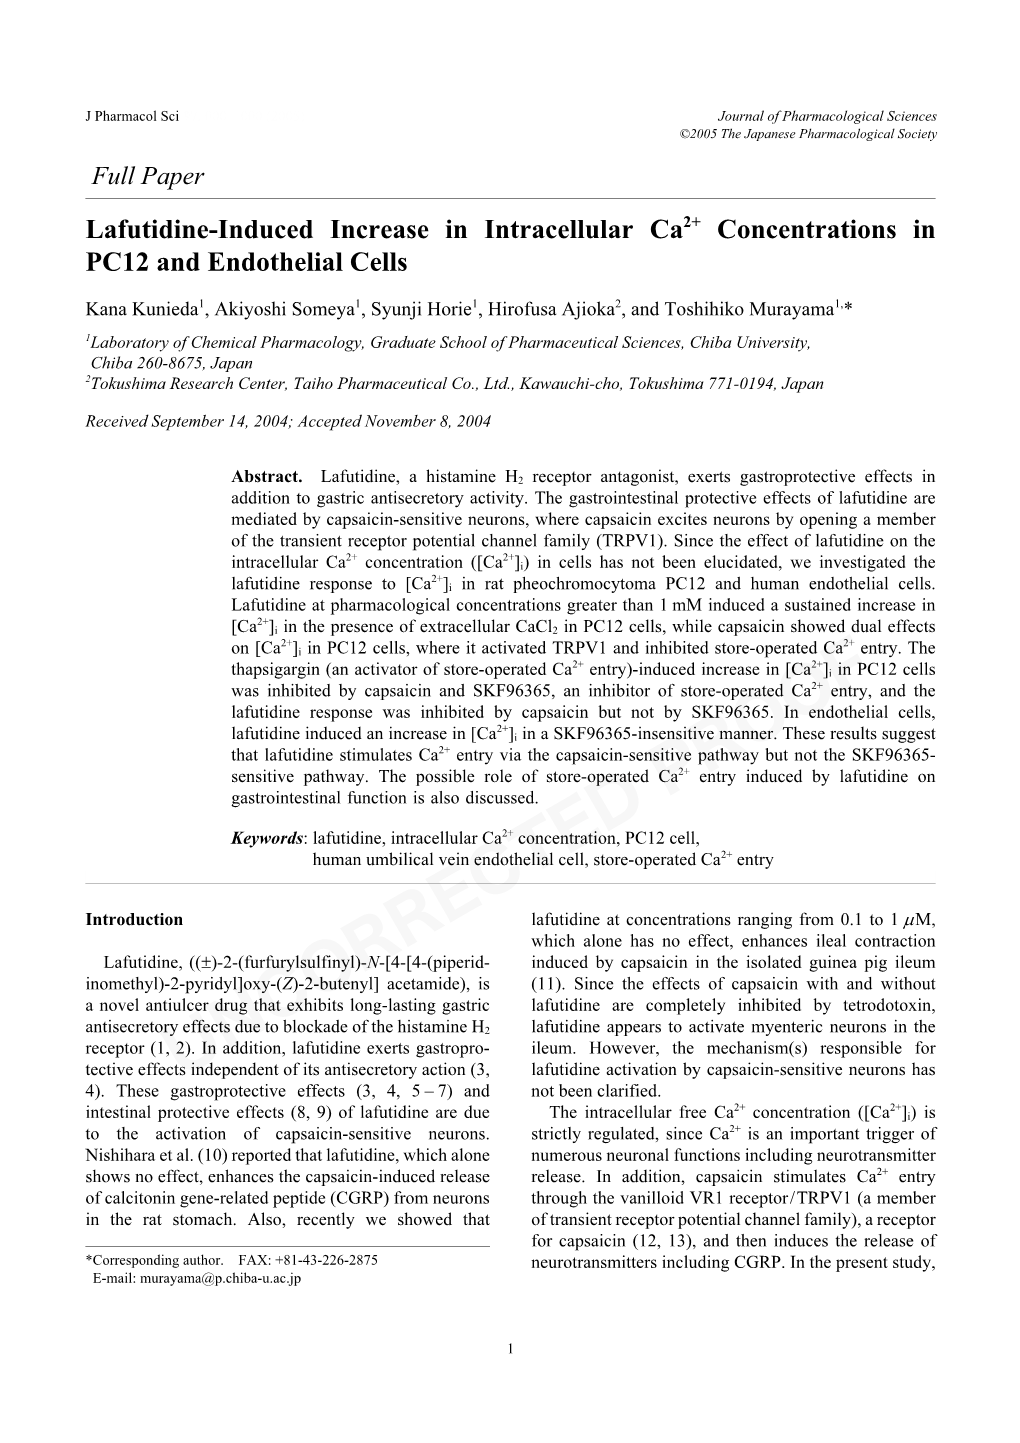 Lafutidine-Induced Increase in Intracellular Ca Concentrations In